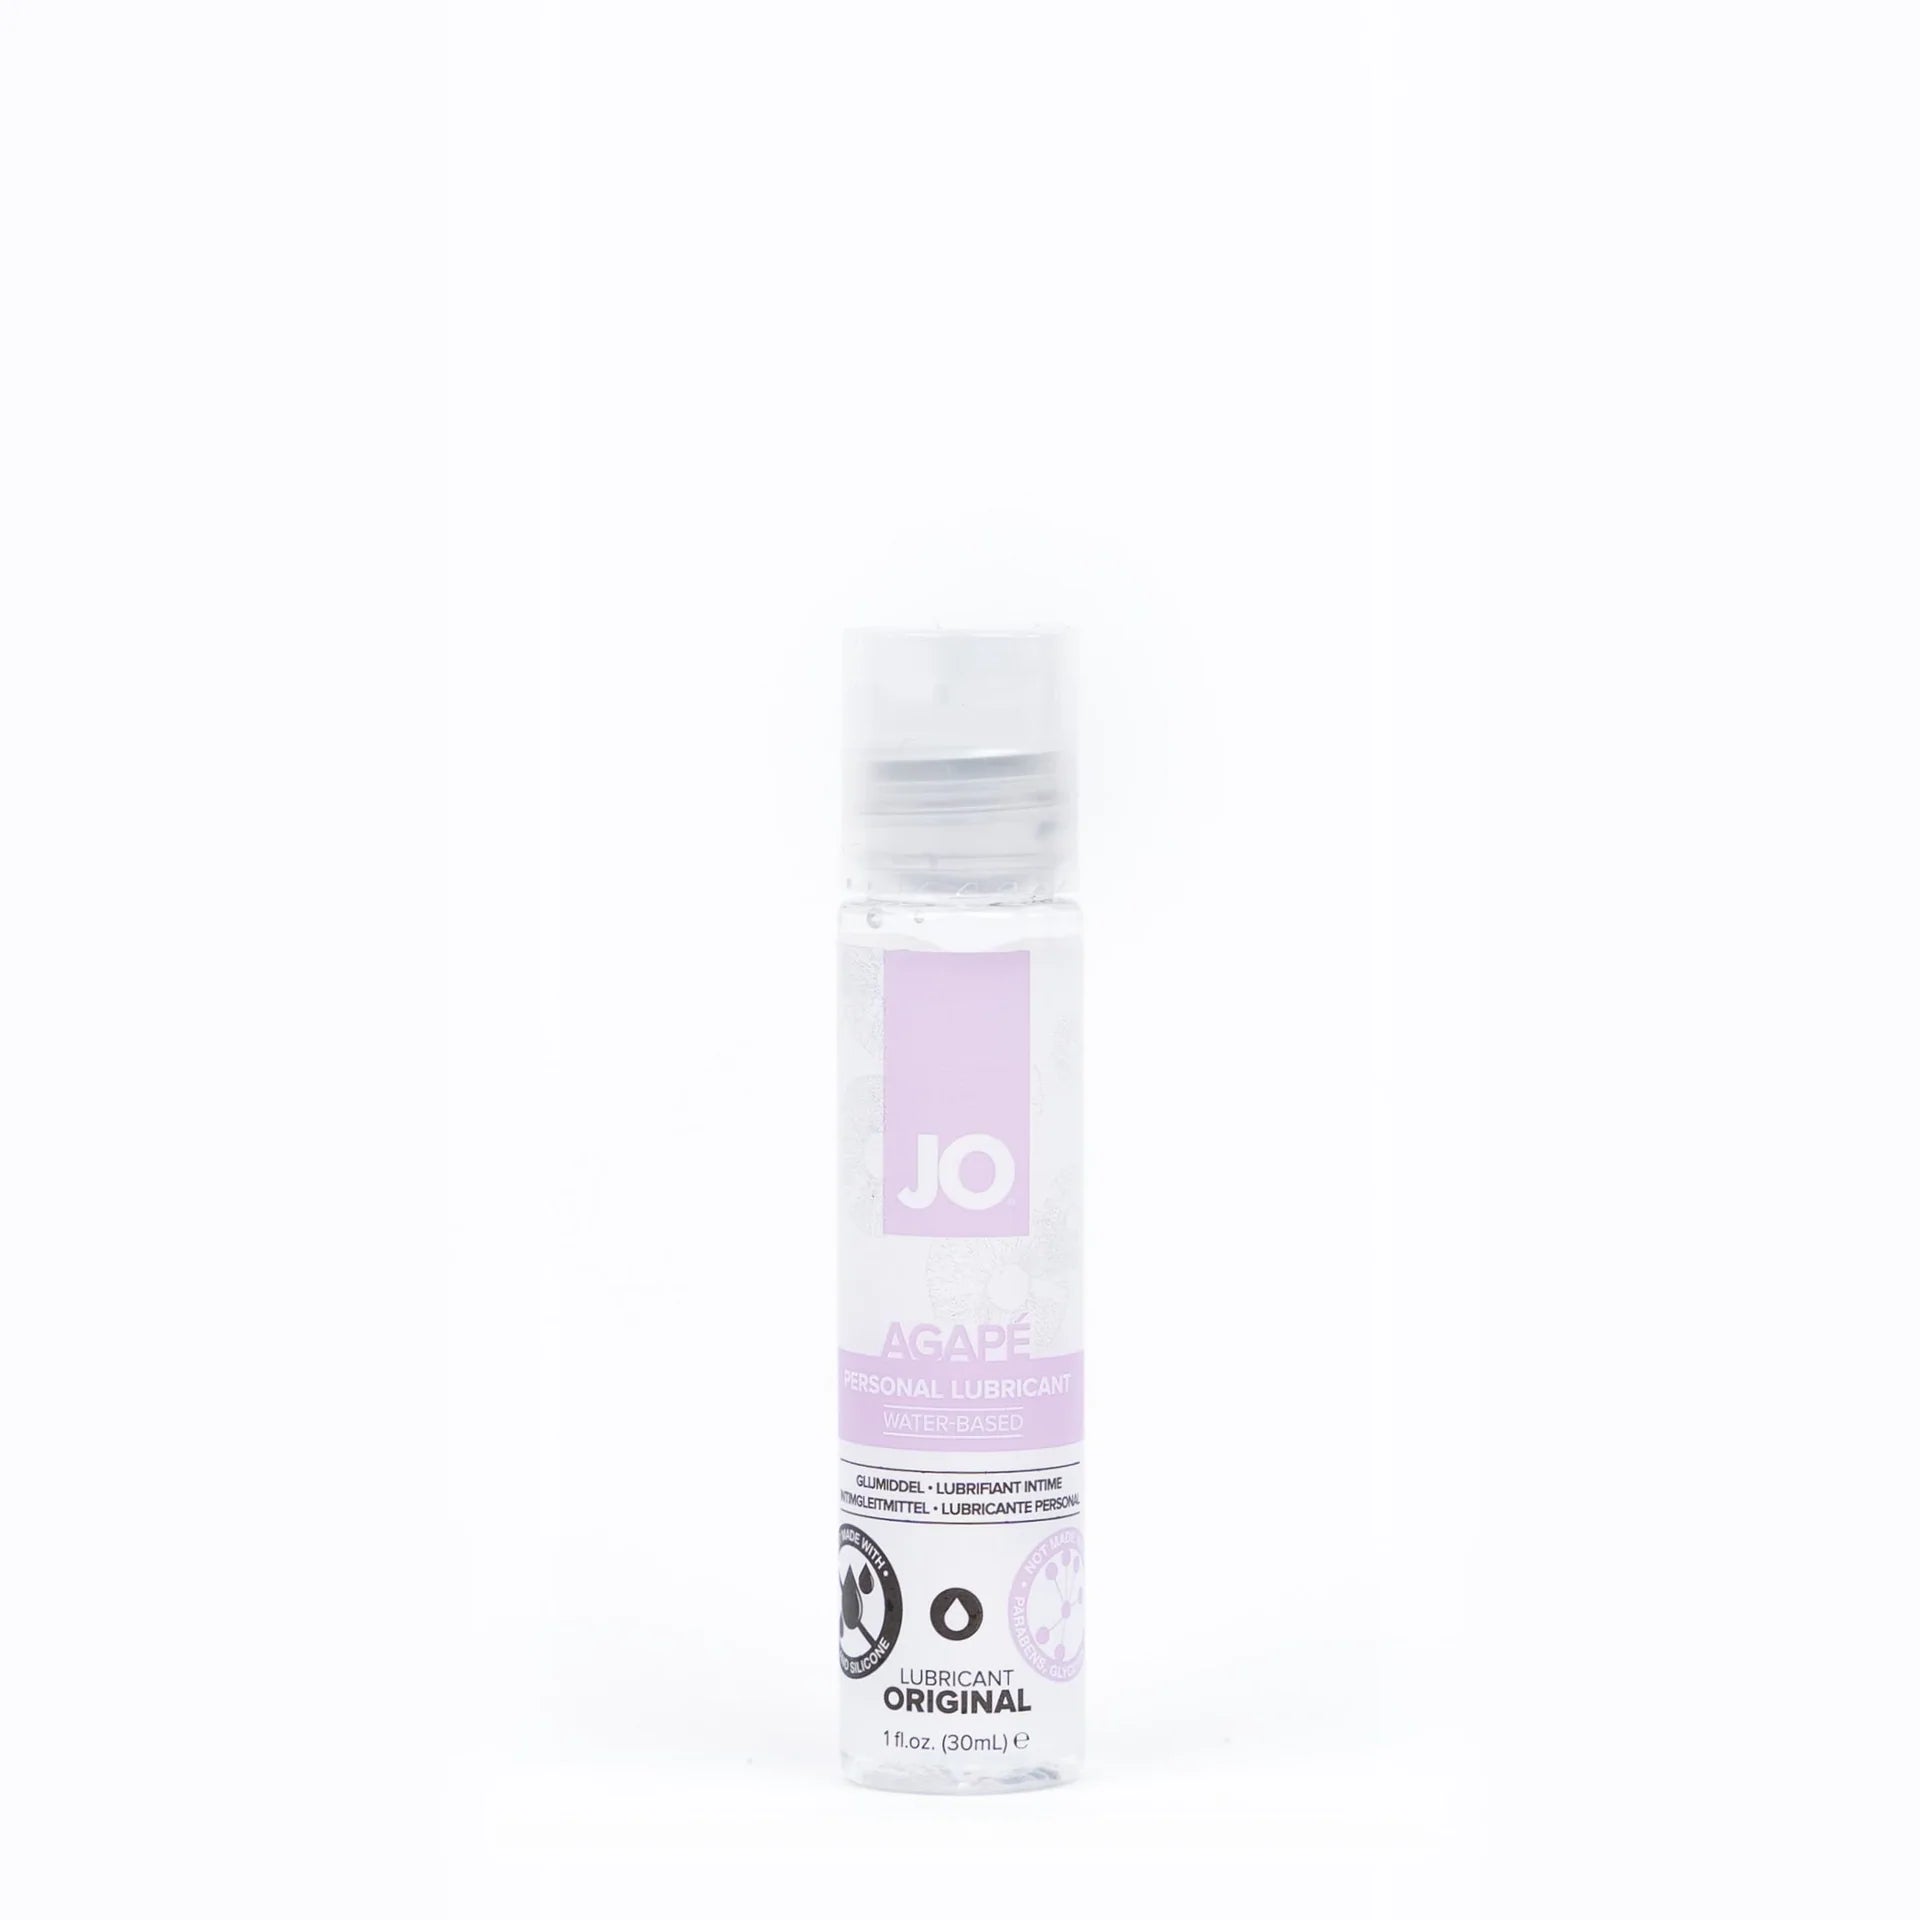 A small 1oz bottle of Jo Agape lubricant with a snap top and lavender graphics.